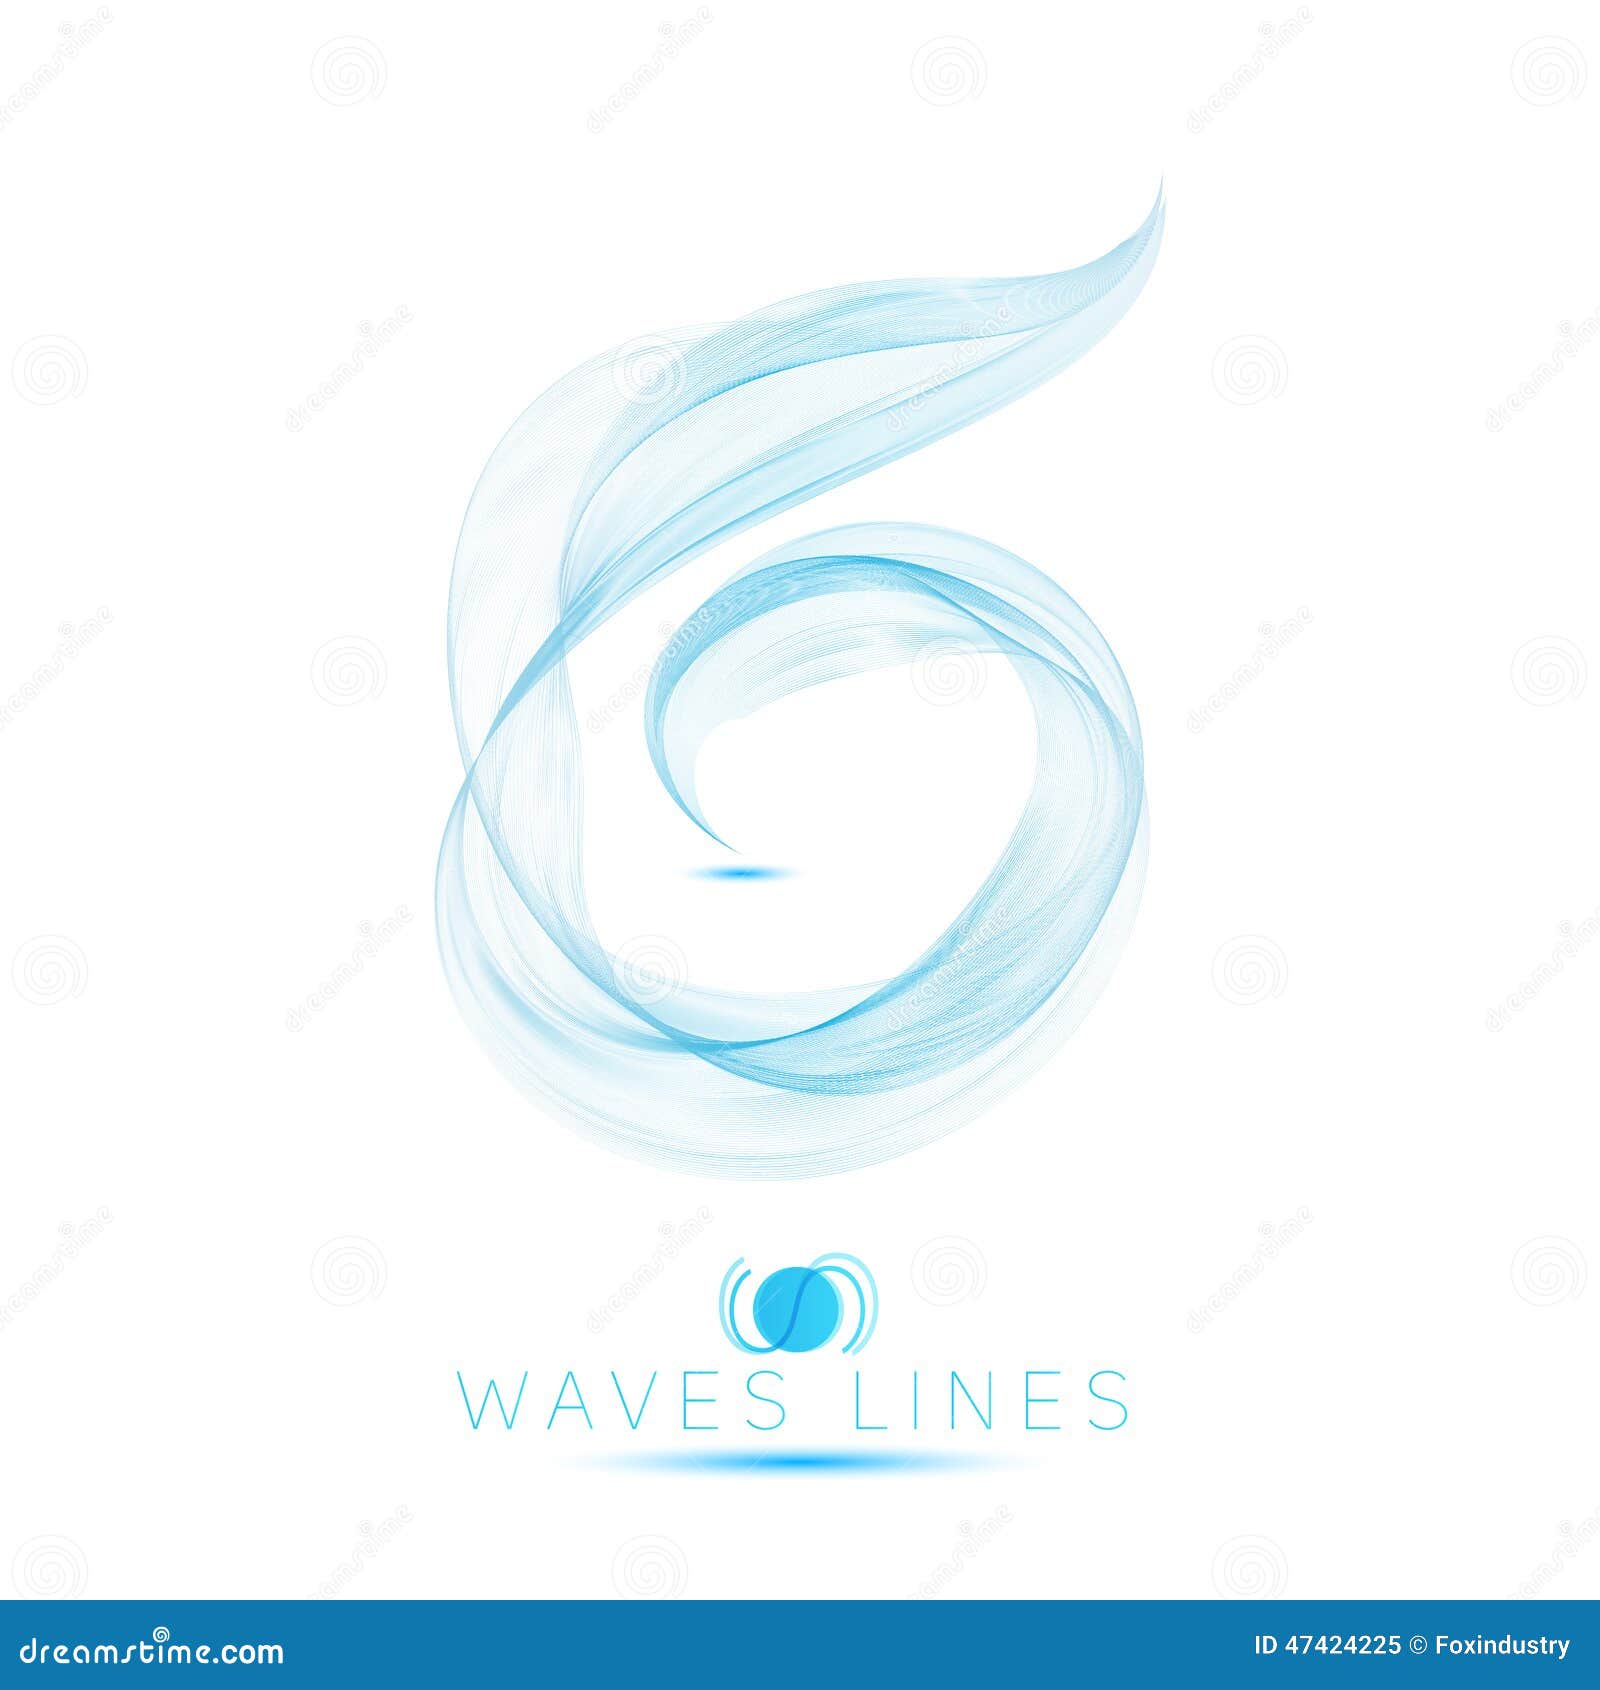 icon logo beautiful blend massive waves abstract background